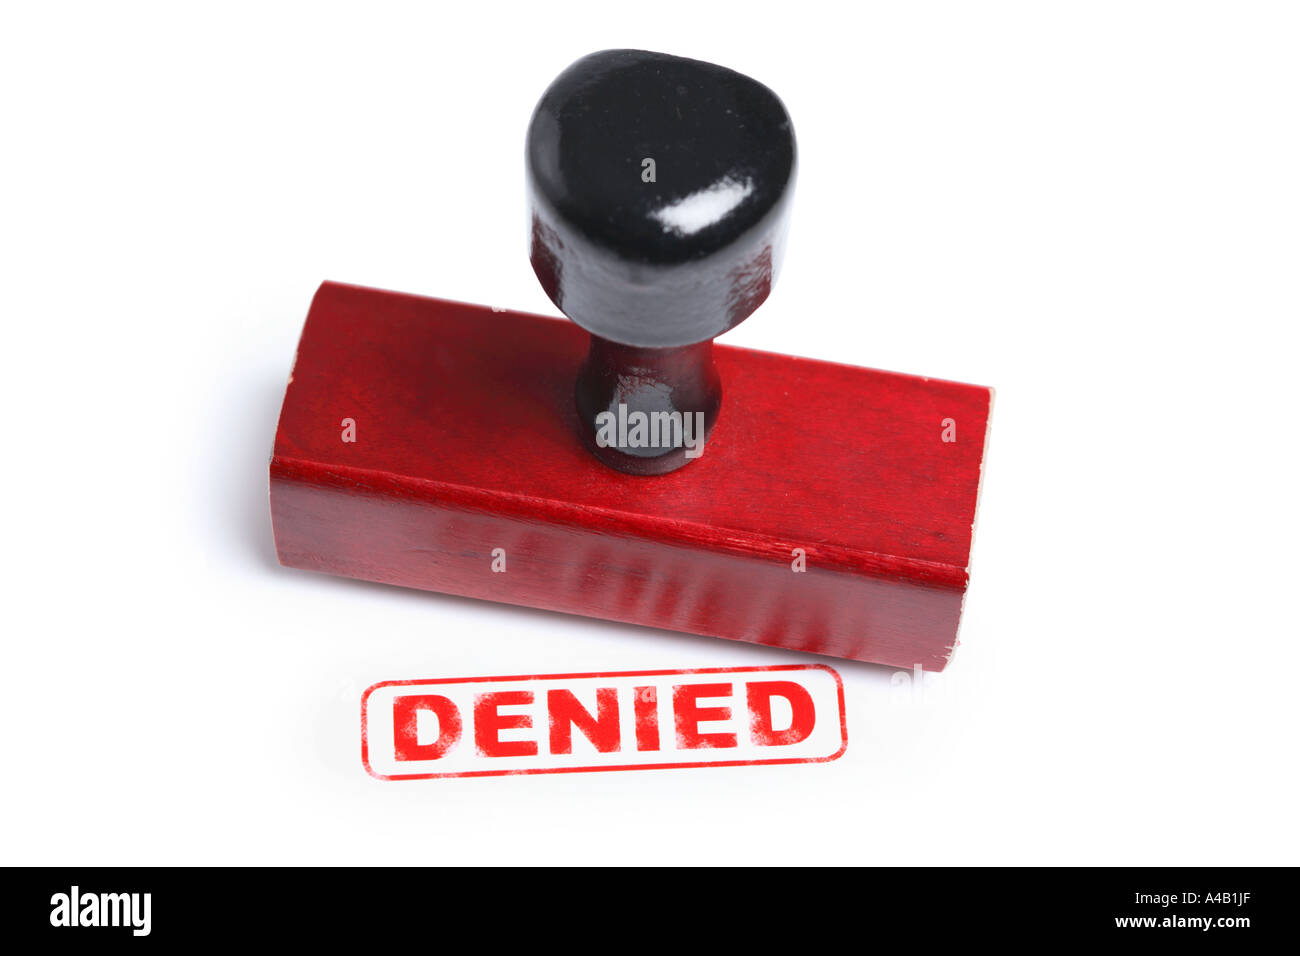 Denied rubber stamp Stock Photo